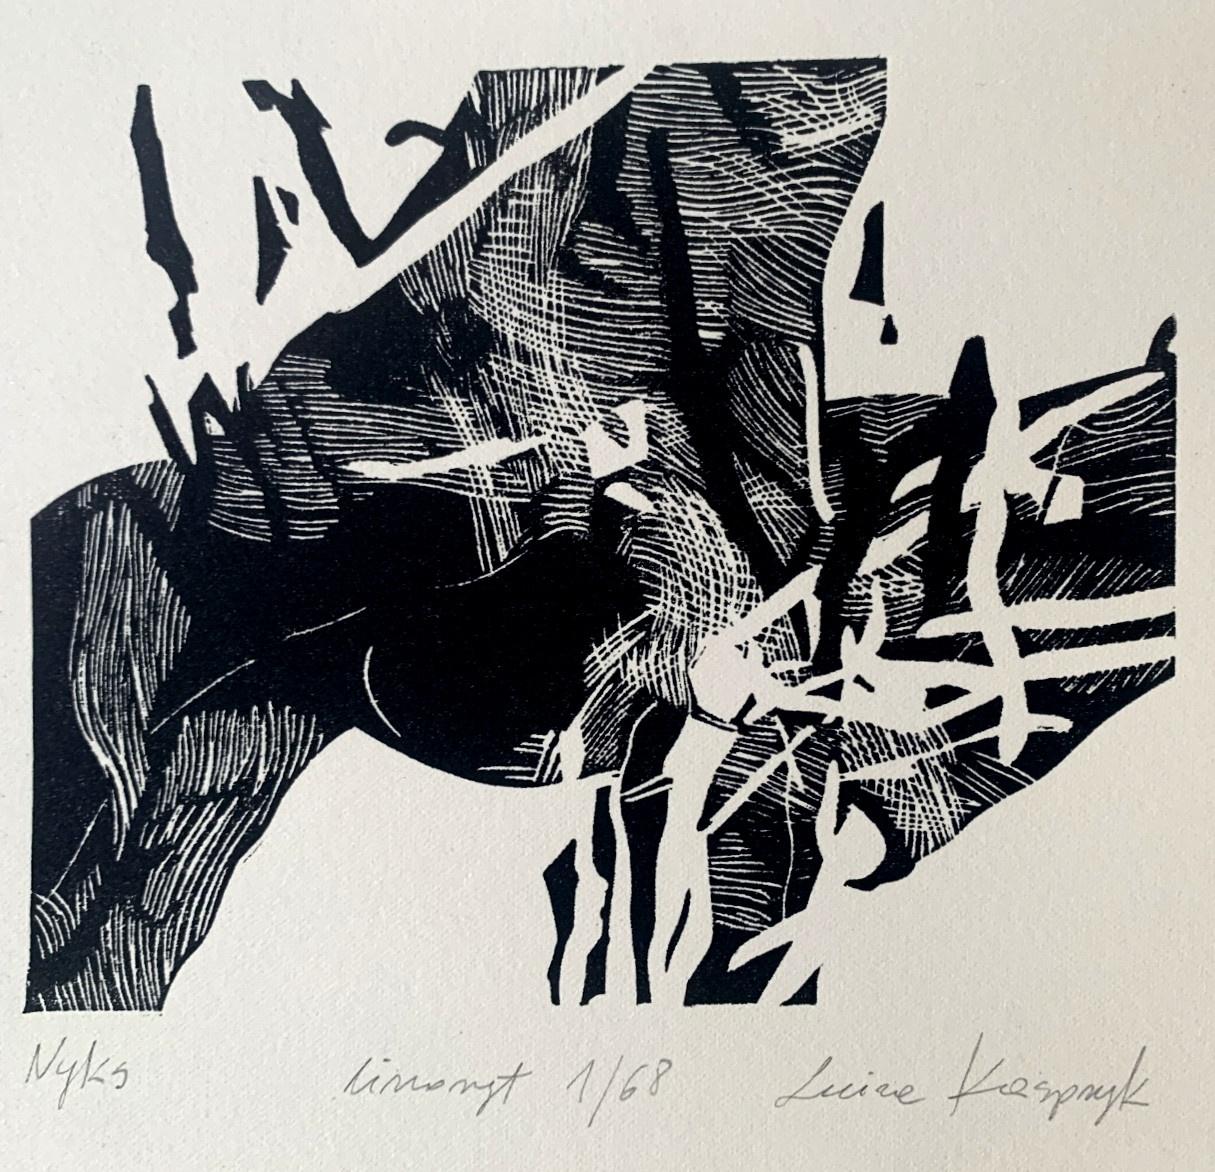 LUIZA KASPRZYK
Studied at the Faculty of Graphics and Painting at the Academy of Fine Arts in Łódź, in atelier of Lithographic Techniques of professor W. Warzywoda. In 2014, her works were presented at the national exhibition Best Diplomas of the